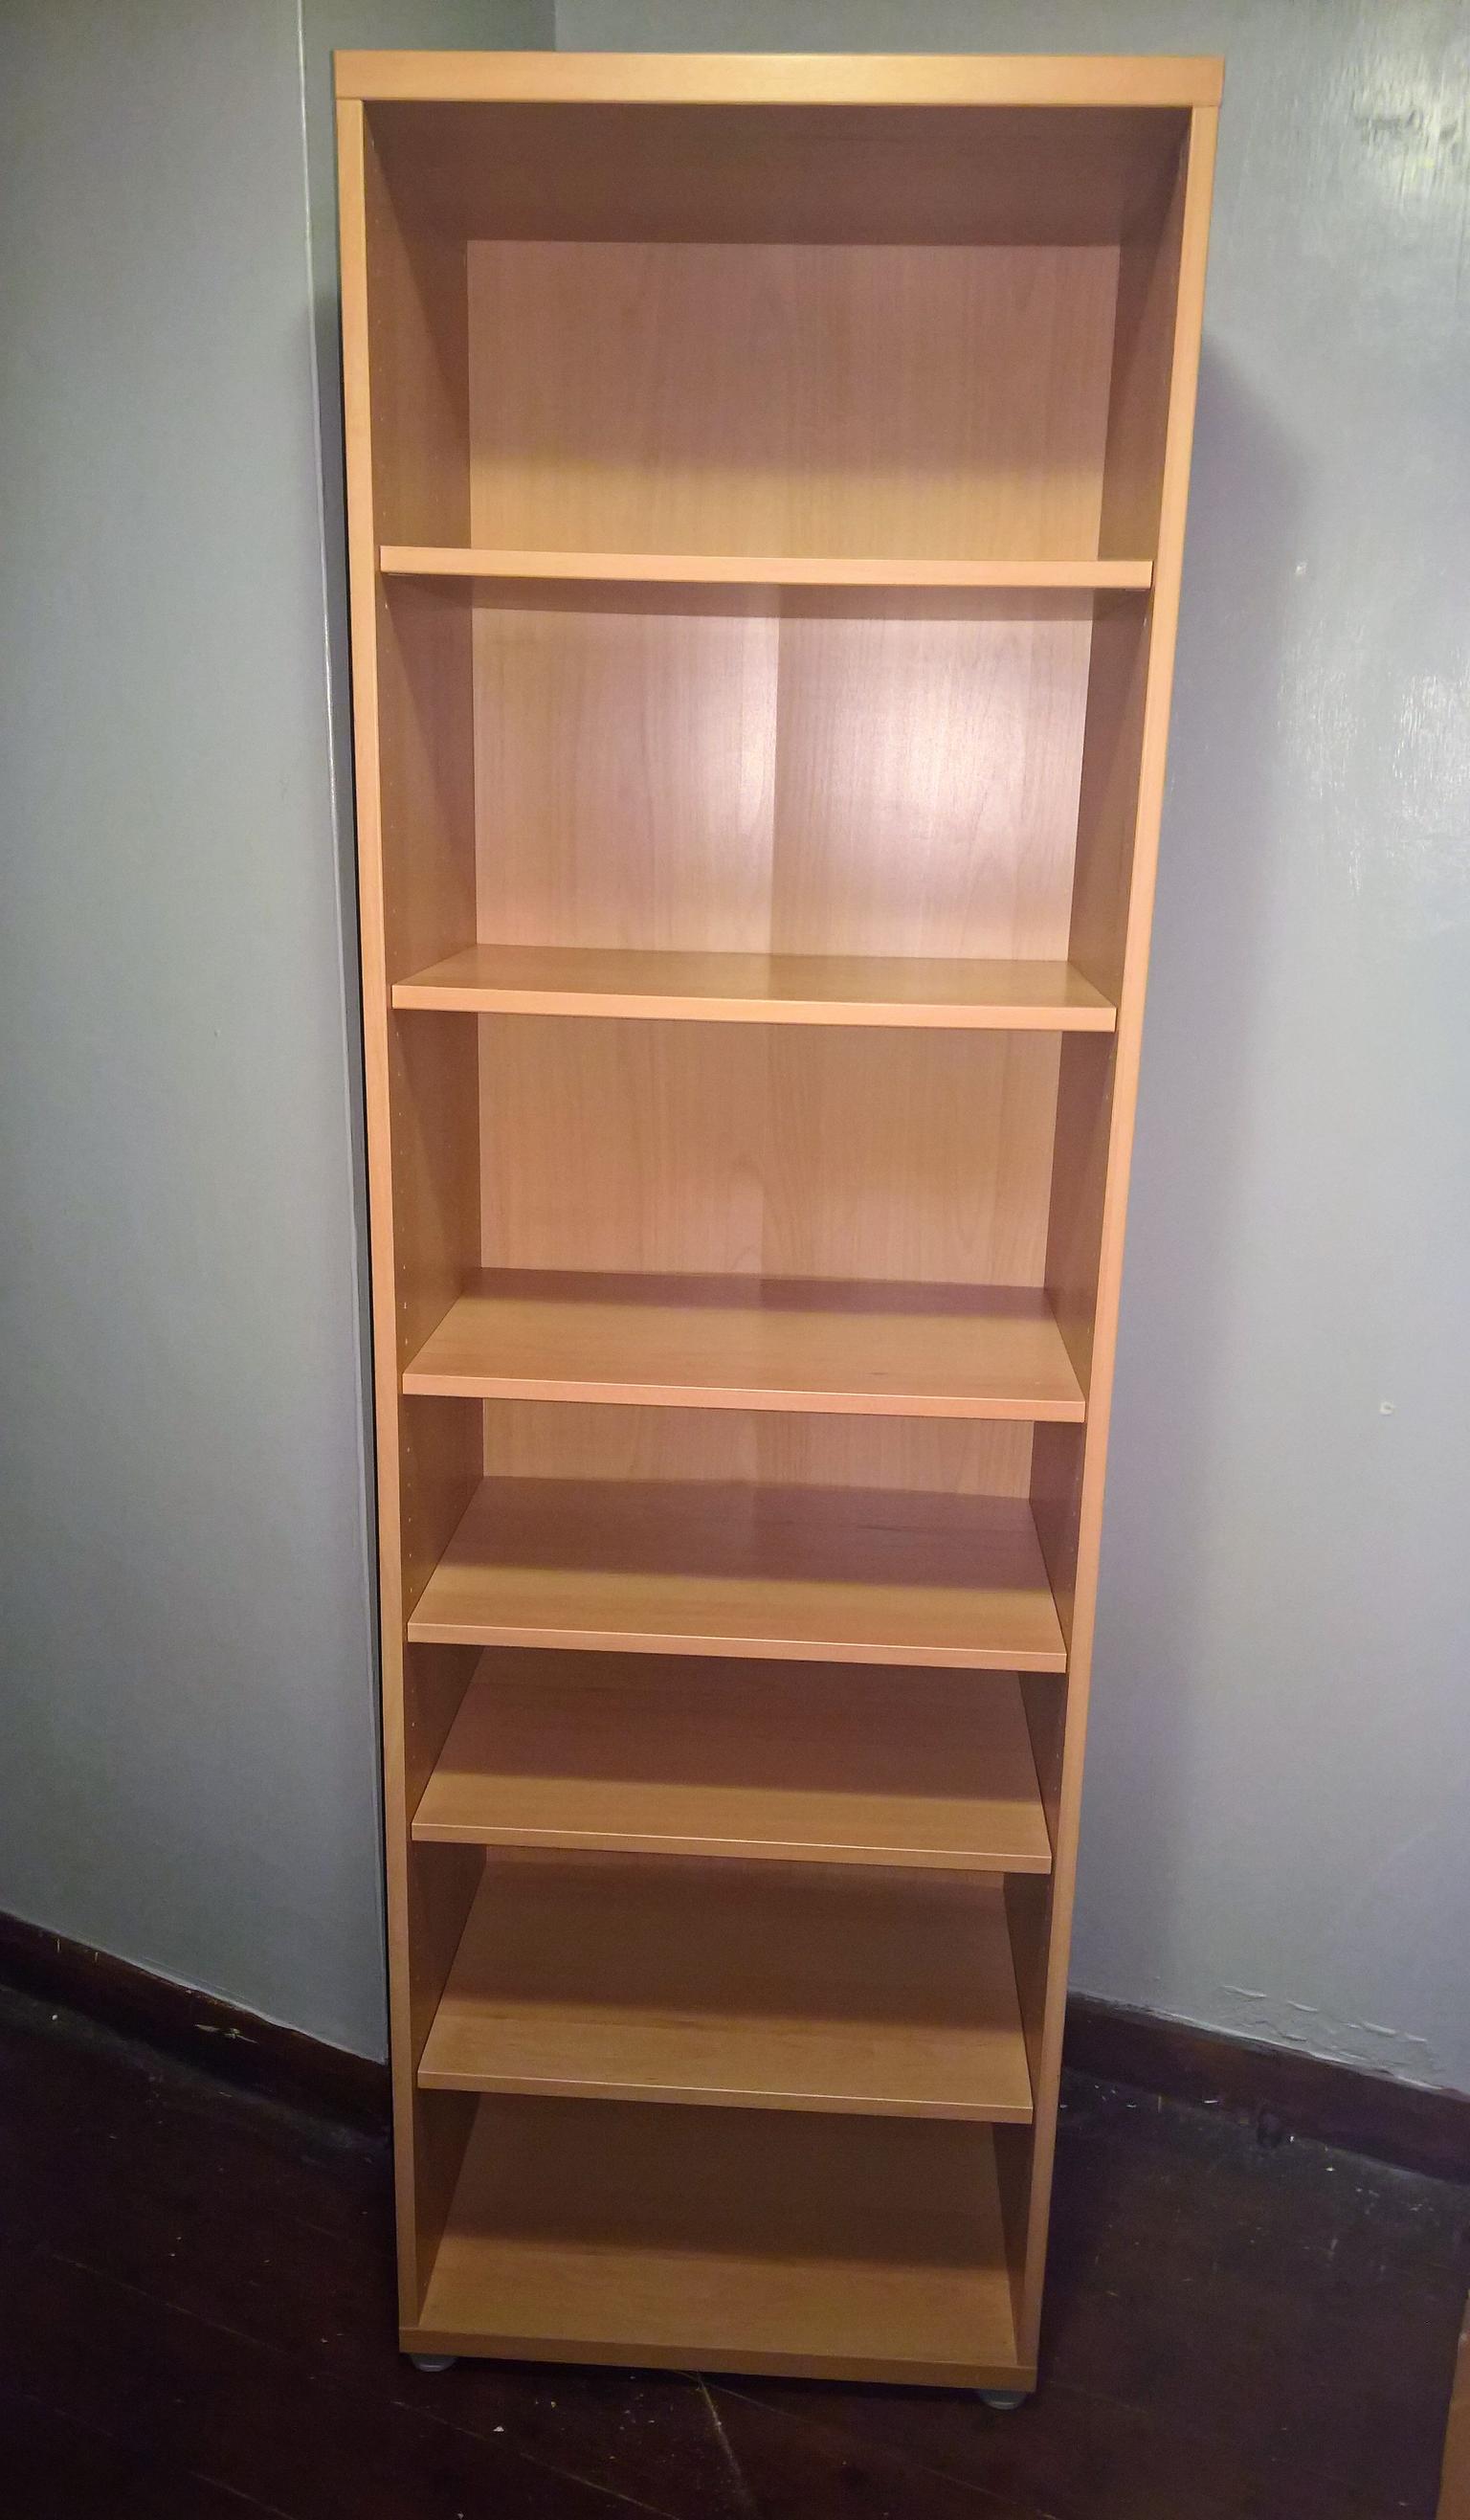 Ikea Billy Bookcase With 3 Extra Shelves In Sw9 Lambeth For 25 00